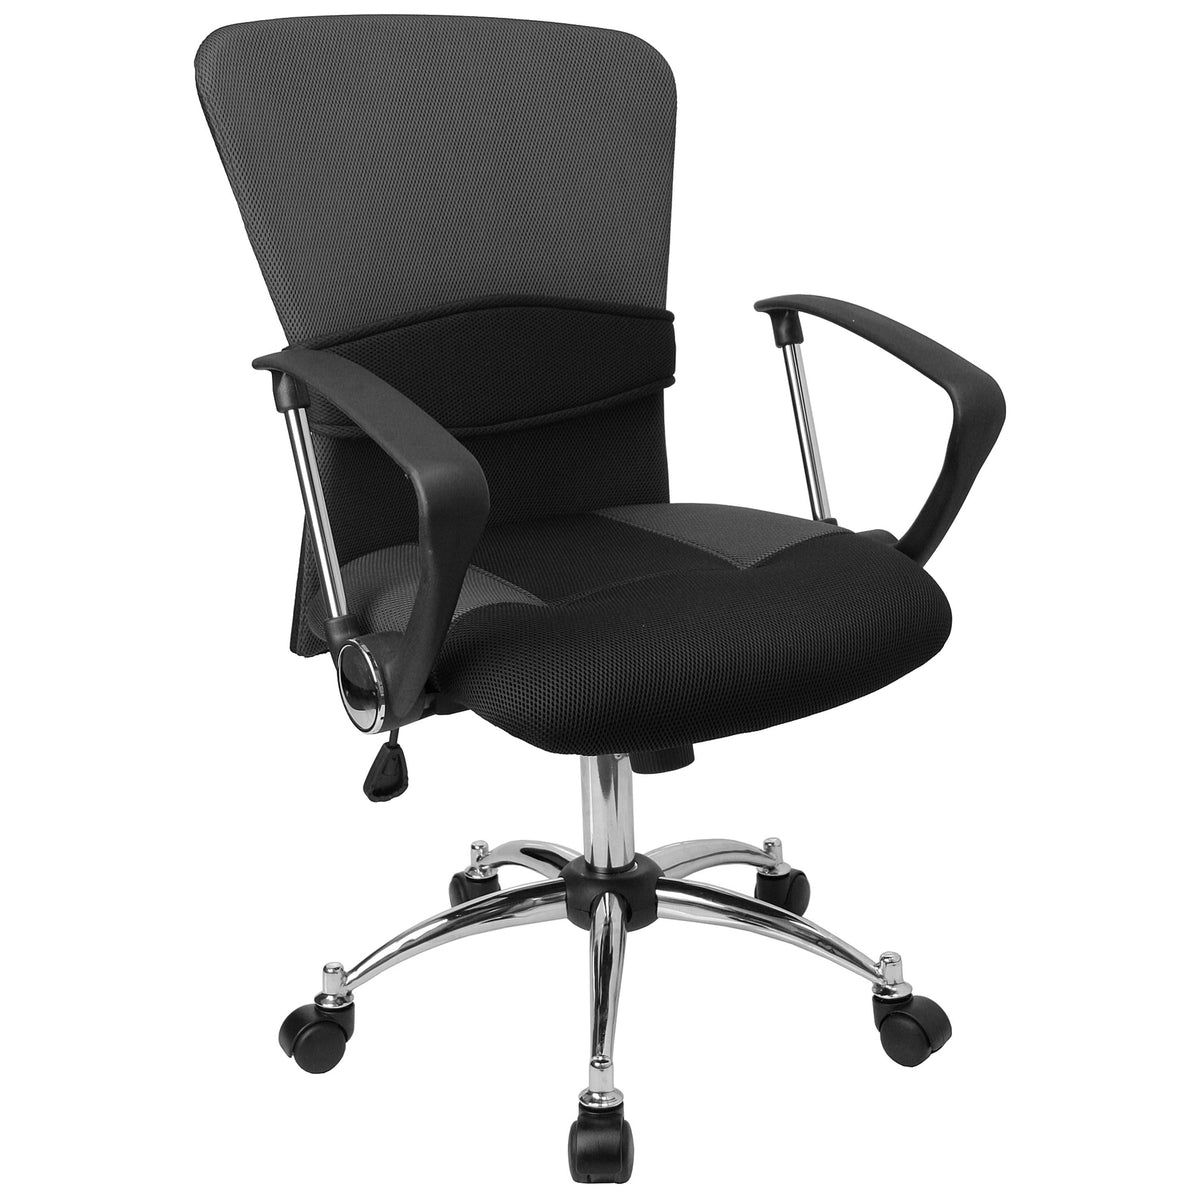 Grey |#| Mid-Back Grey Mesh Swivel Task Office Chair w/ Adjustable Lumbar Support & Arms